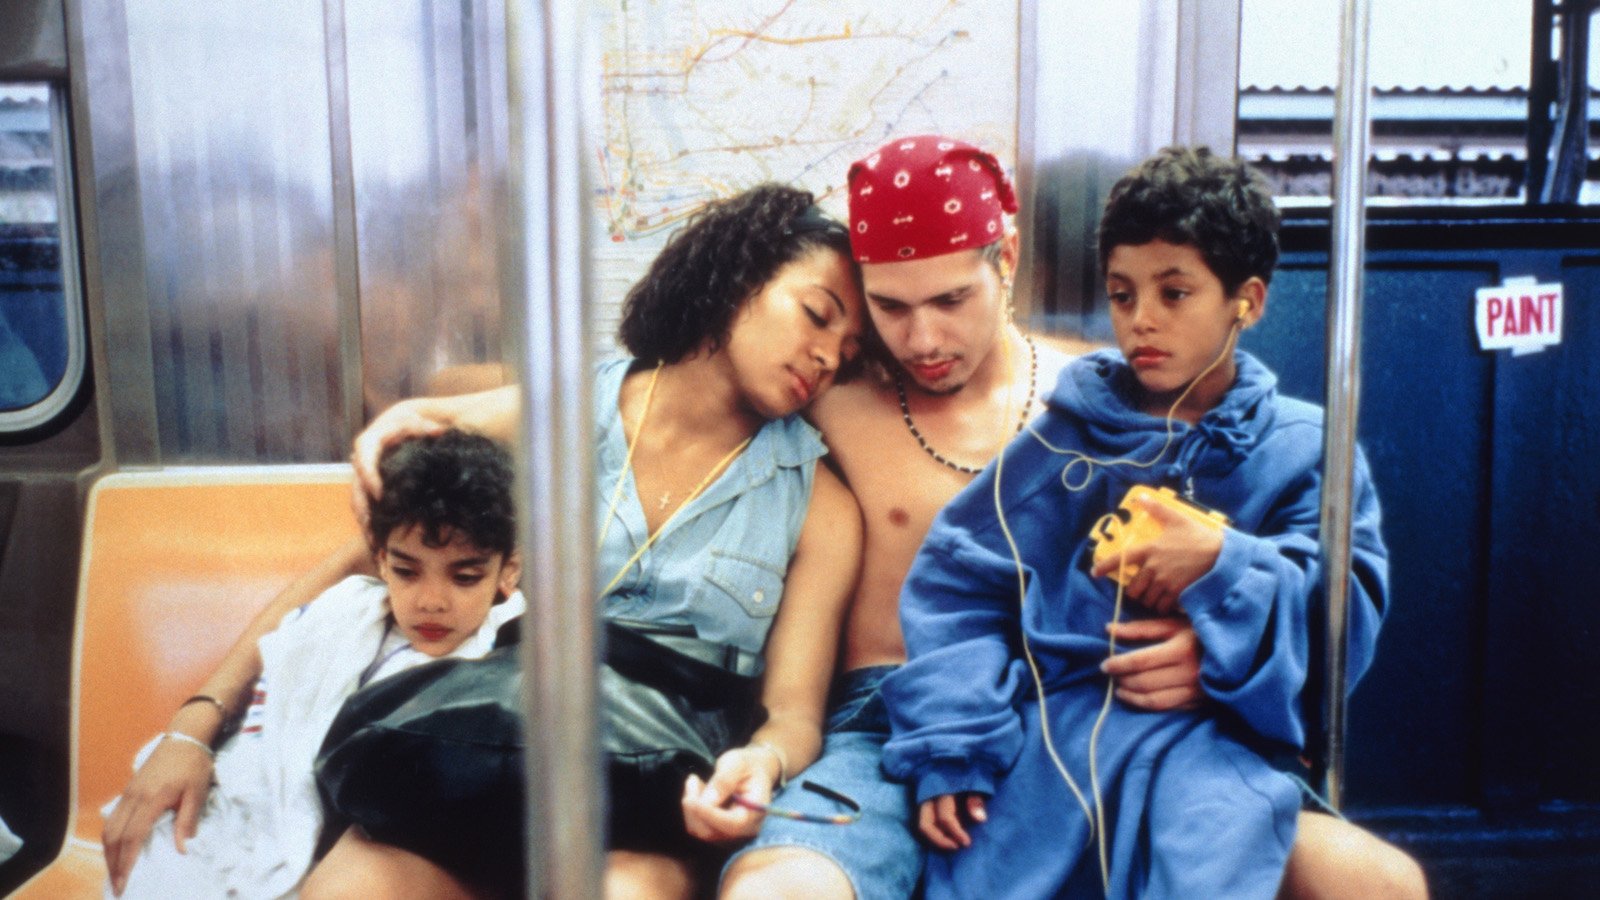 A husband and wife hold their two kids as they sit on the New York City subway